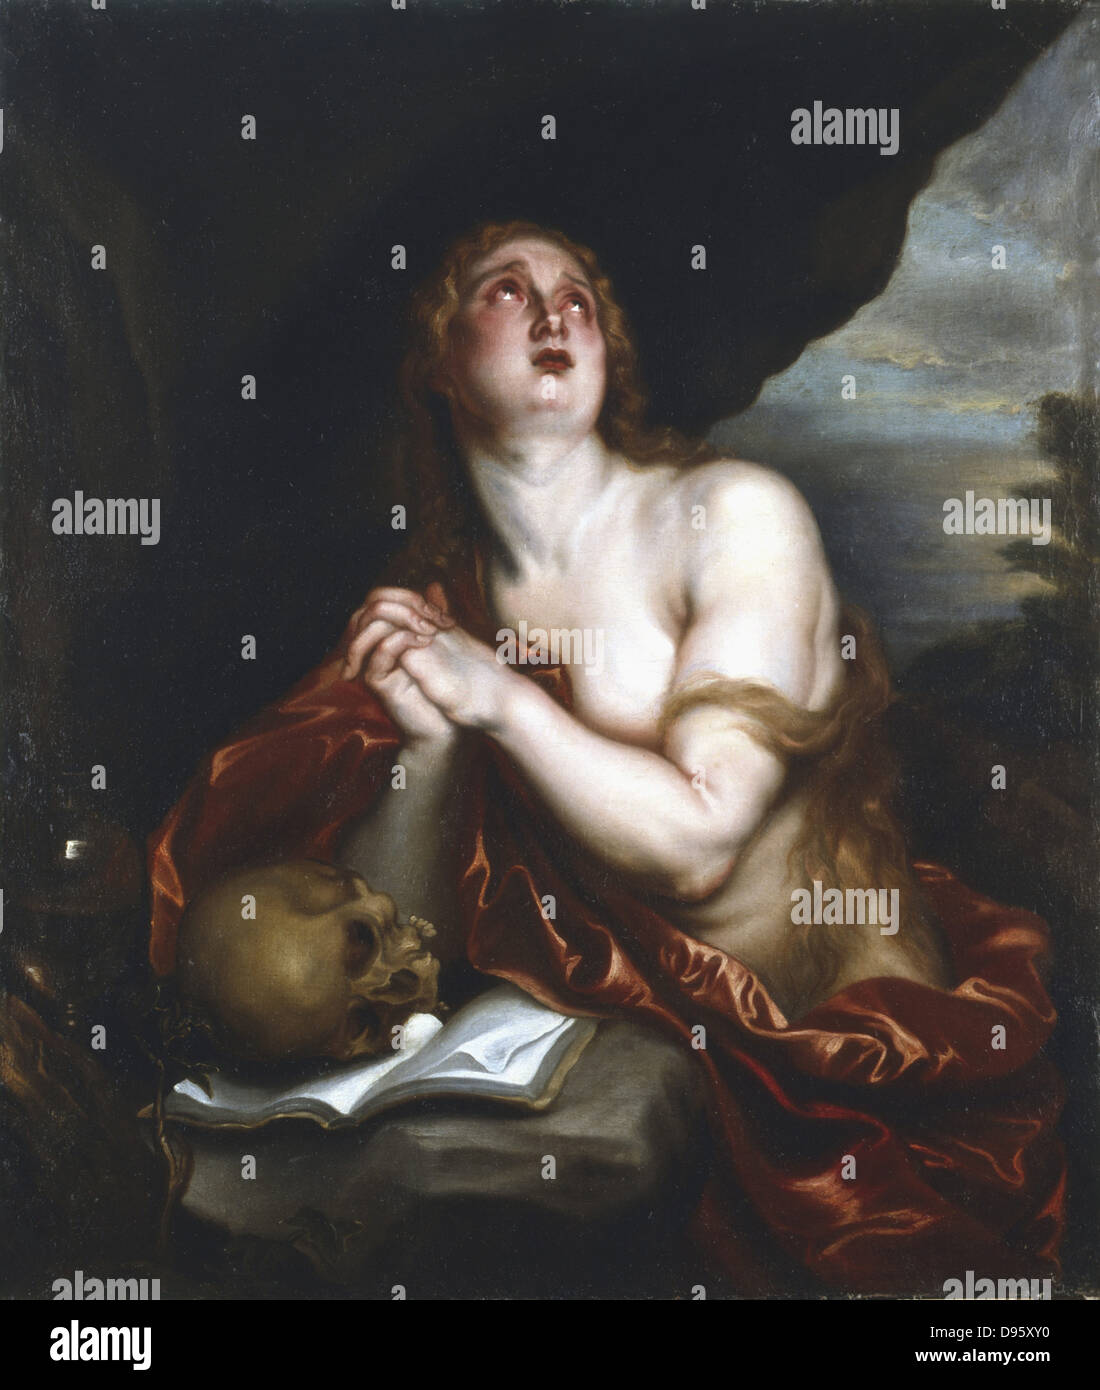 Penitent Magdalene'. Studio of Anton van Dyck (1599-1641). Oil on canvas. Private collection. Stock Photo